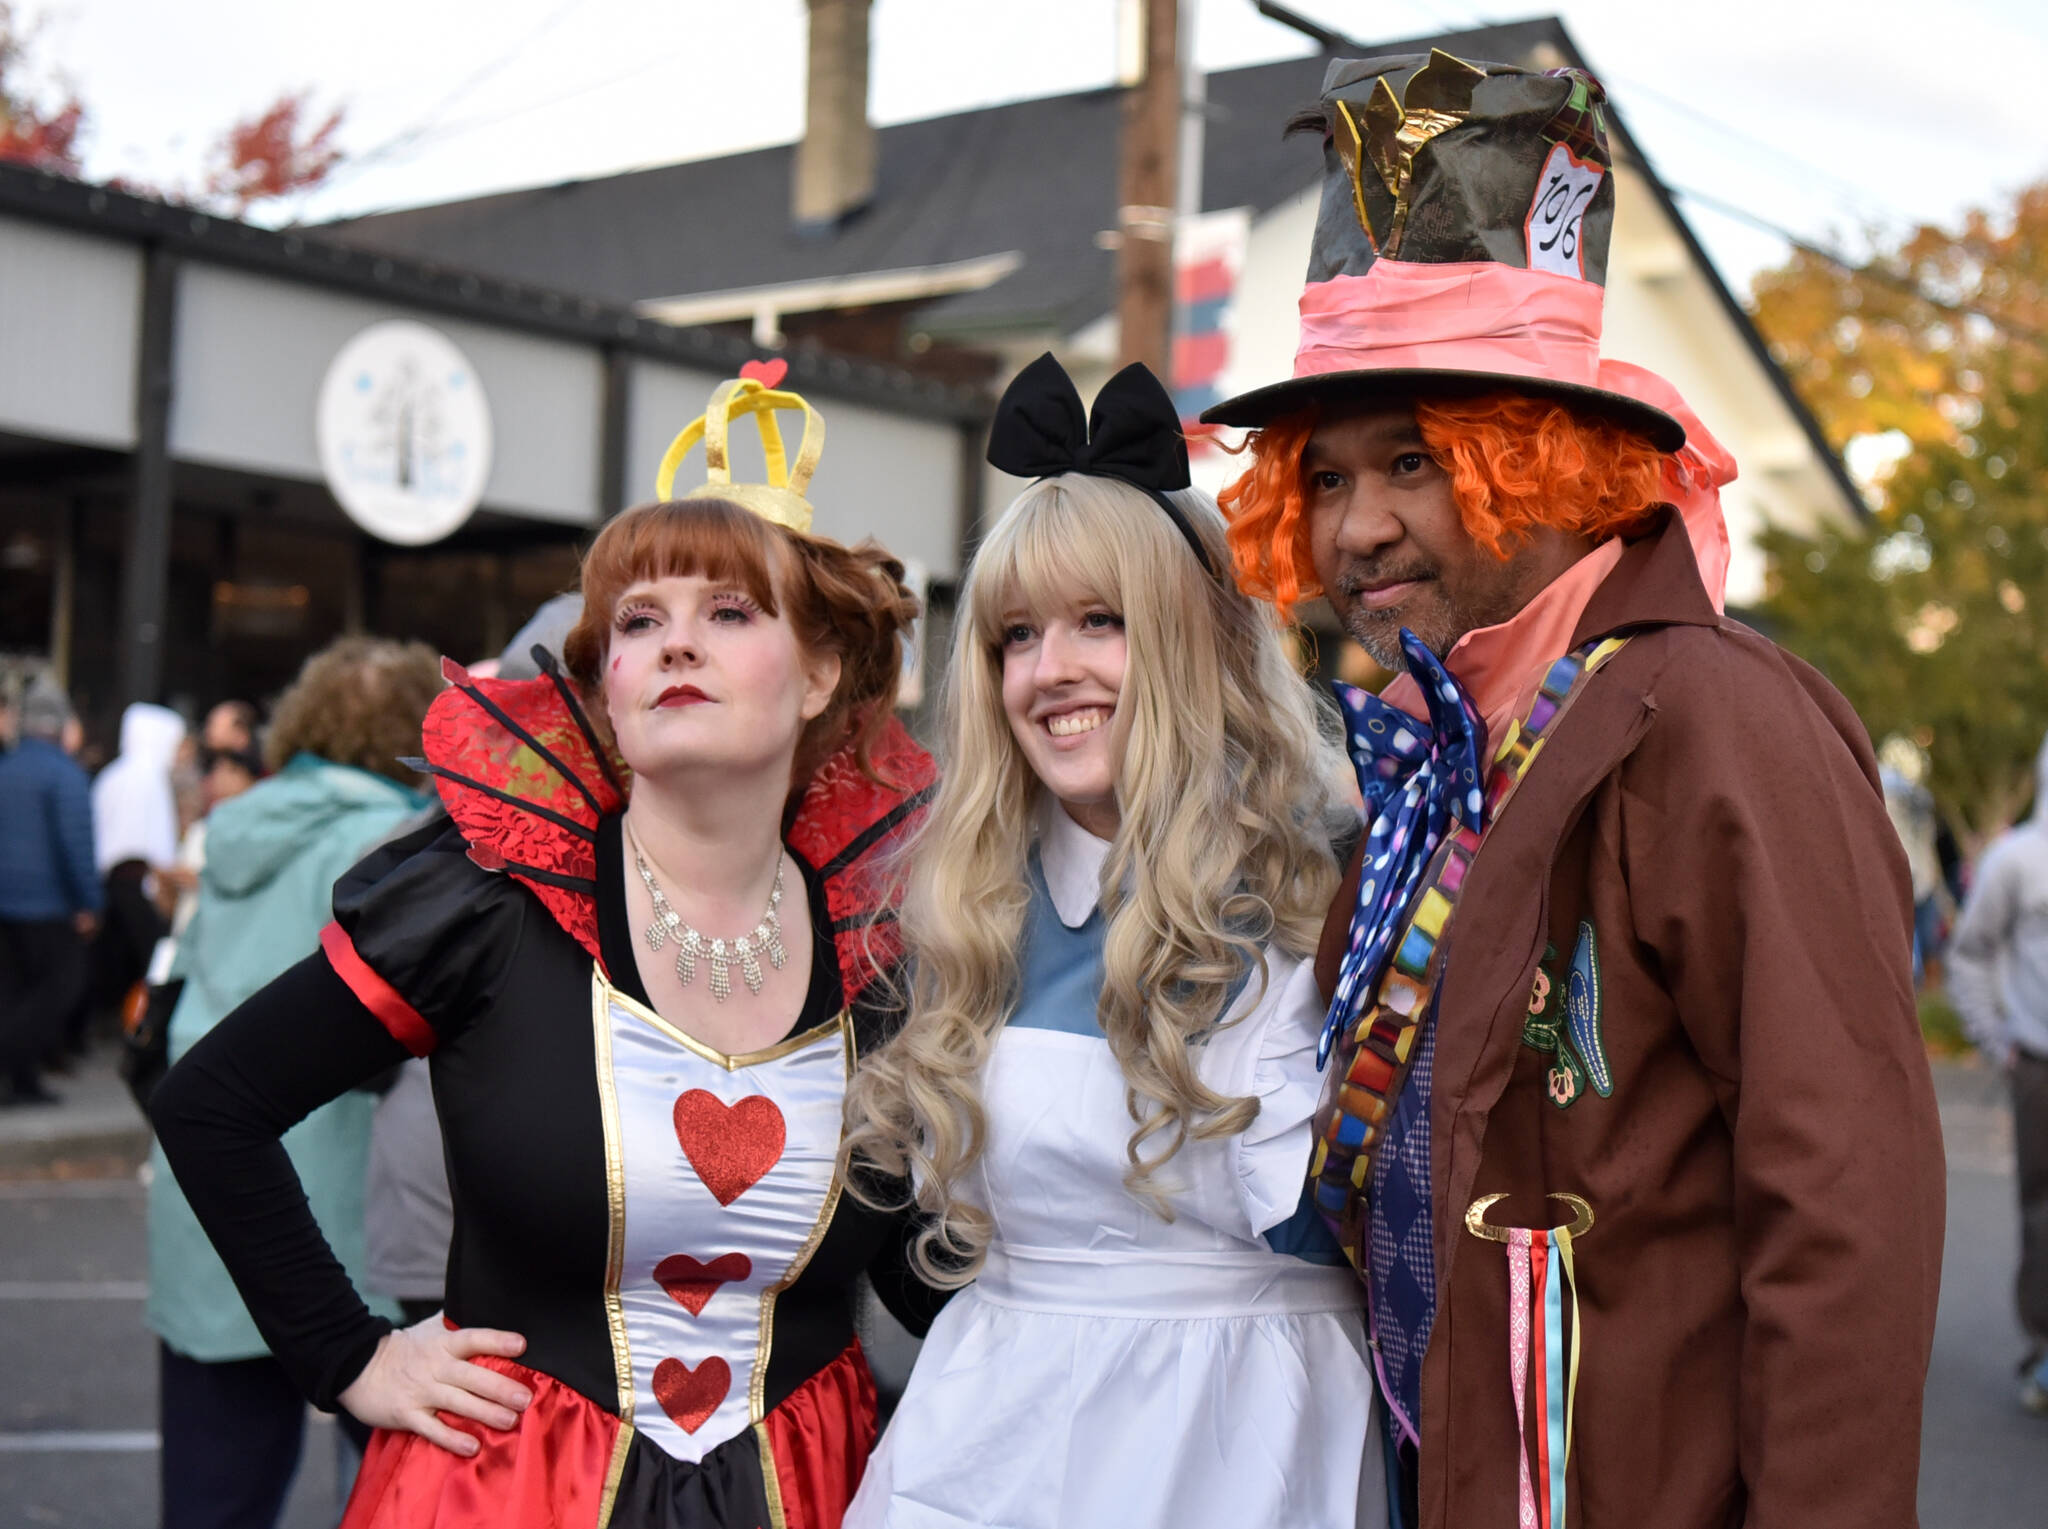 Alice in Wonderland, the Queen of Hearts and the Mad Hatter pose for a photo at the event.